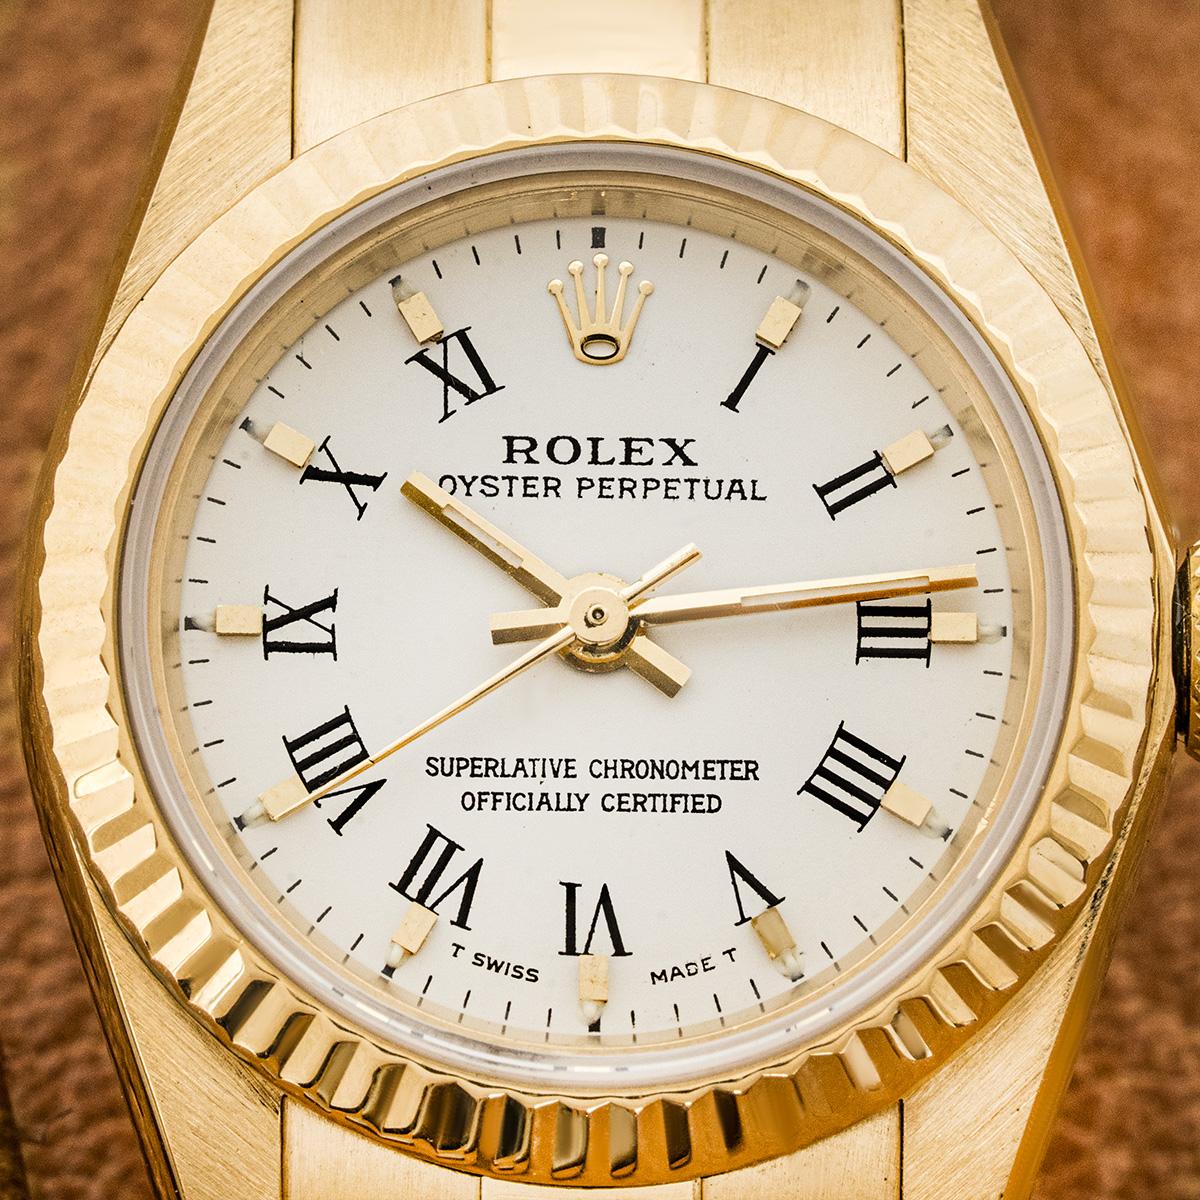 A ladies 24mm Oyster Perpetual in 18k yellow gold by Rolex. Featuring a white dial with roman numerals and a yellow gold fluted bezel. The watch is fitted with a sapphire crystal, a self-winding automatic movement and equipped with a yellow gold